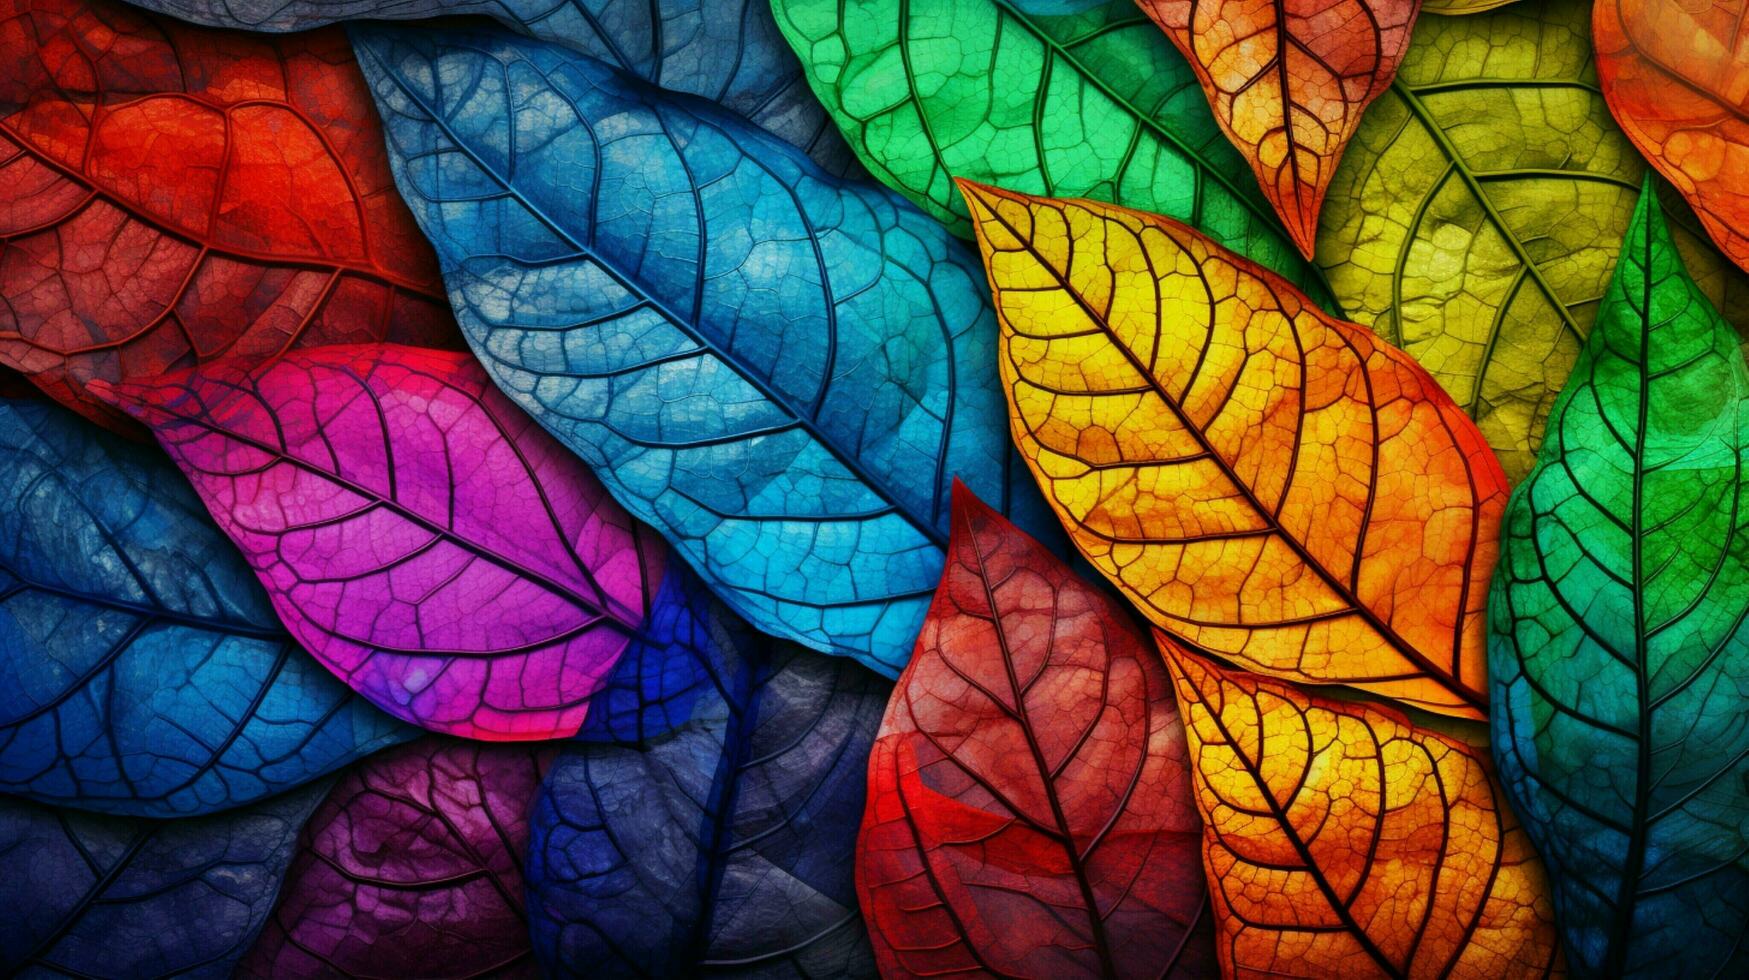 leaf vein nature abstract pattern in vibrant colors photo